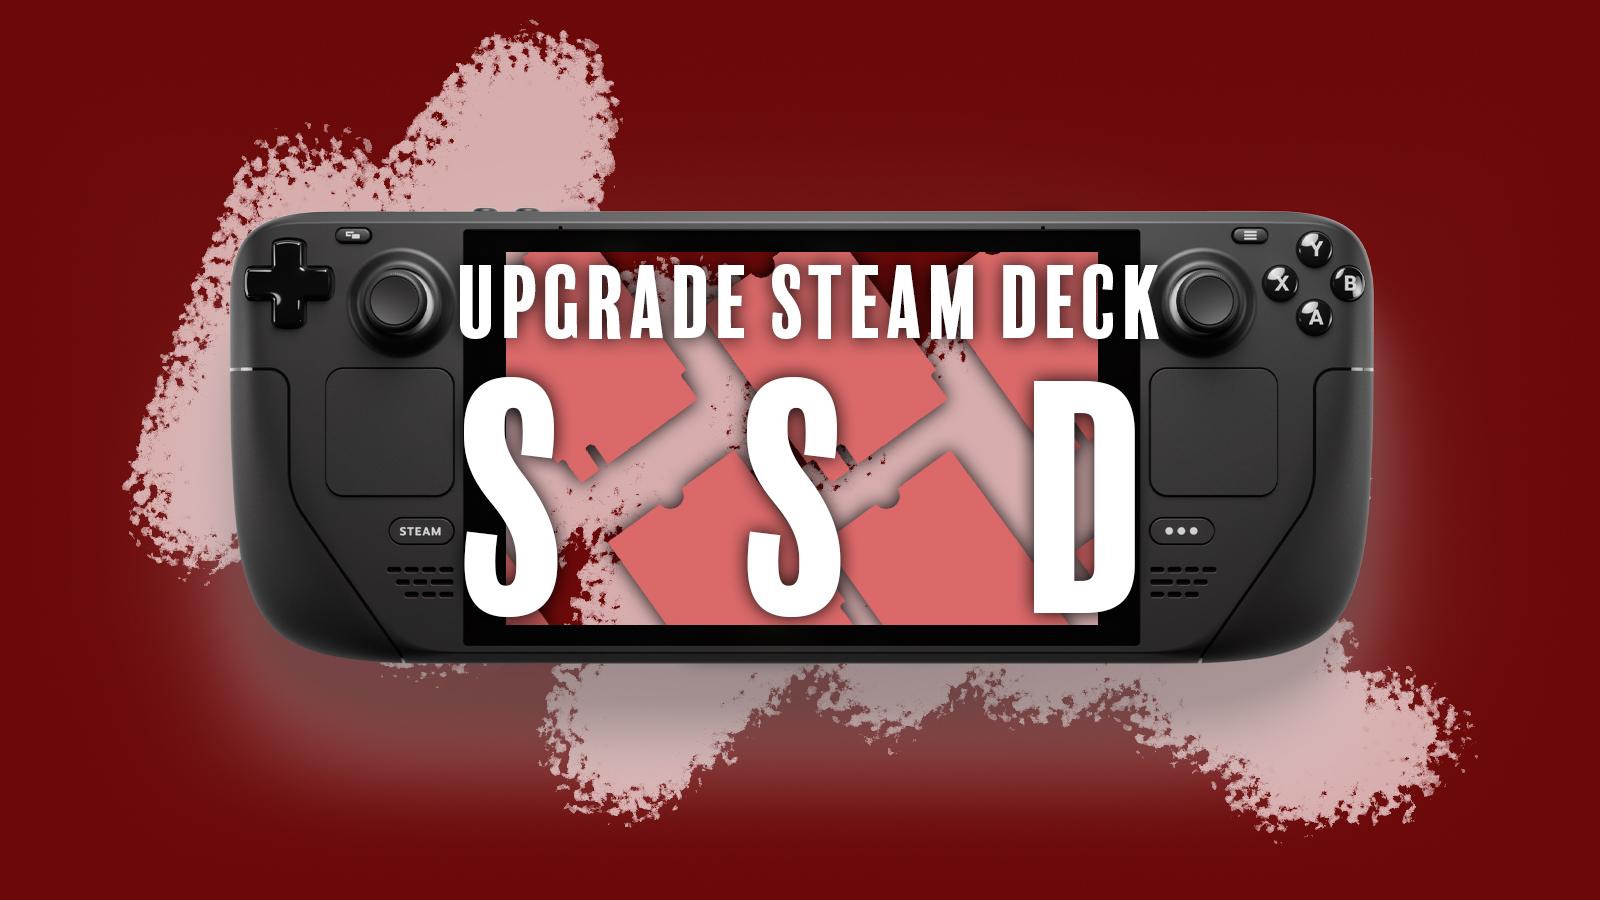 The Steam Deck has released, here's my initial review